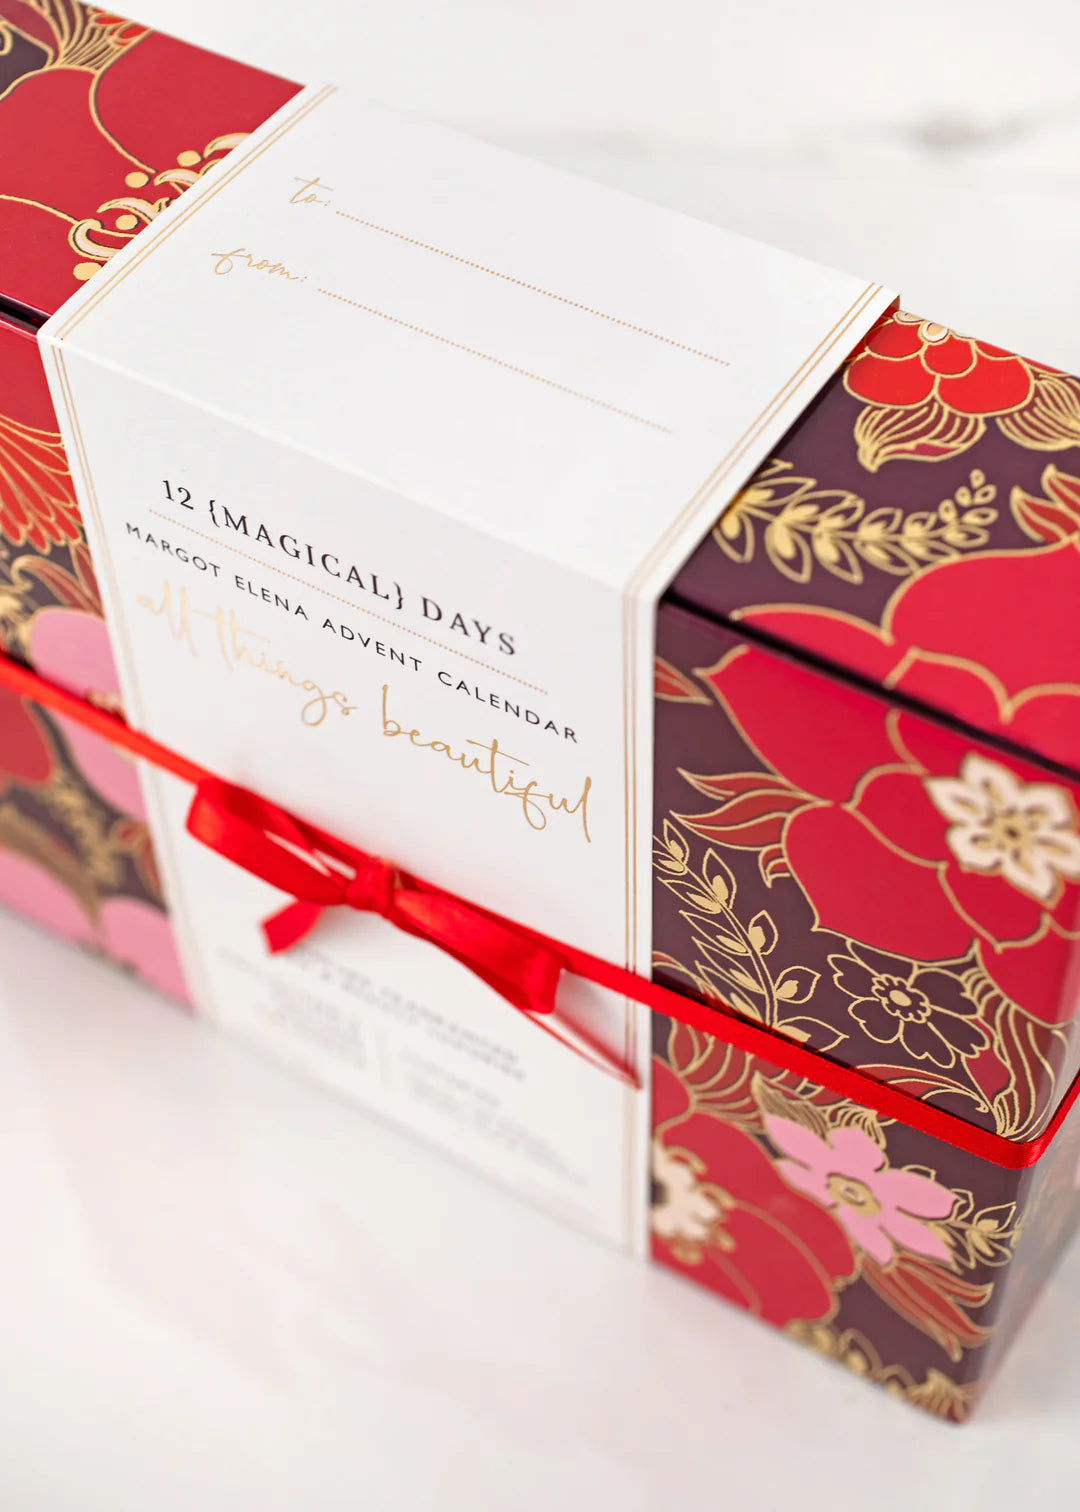 A festive Margot Elena Advent Calendar is decorated with floral patterns in red and gold. It is labeled "12 Magical Days" and wrapped with a red ribbon. There is a space for writing "To" and "From" on the top. The text "all things beautiful" is elegantly written on it.